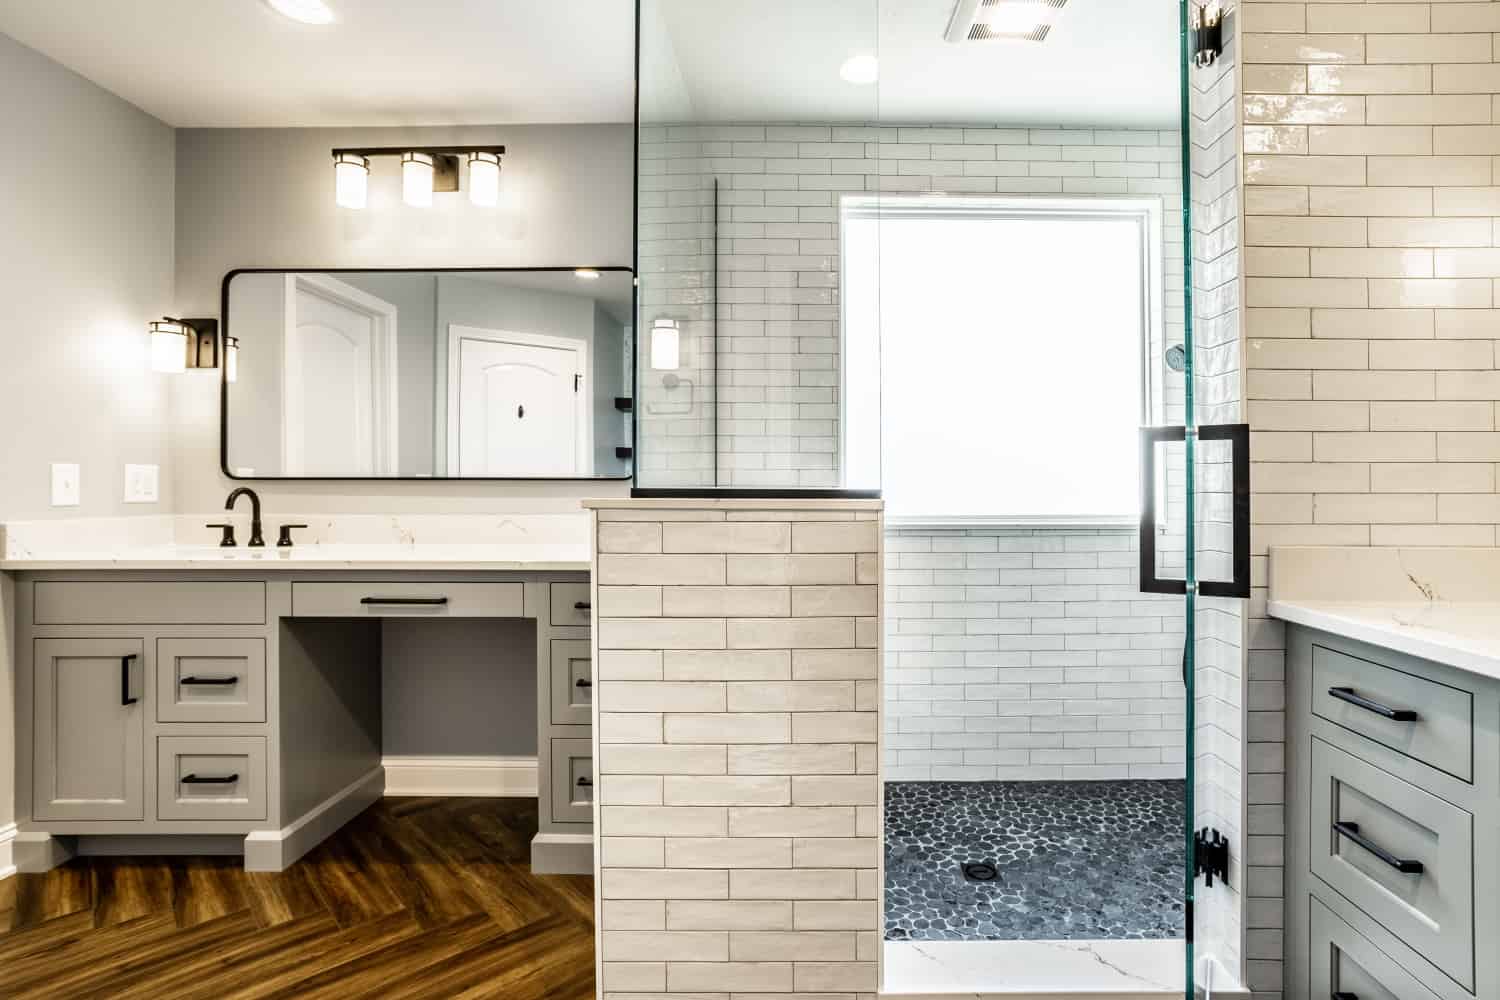 Nicholas Design Build | A black and blue bathroom with a glass shower stall and wood floors.